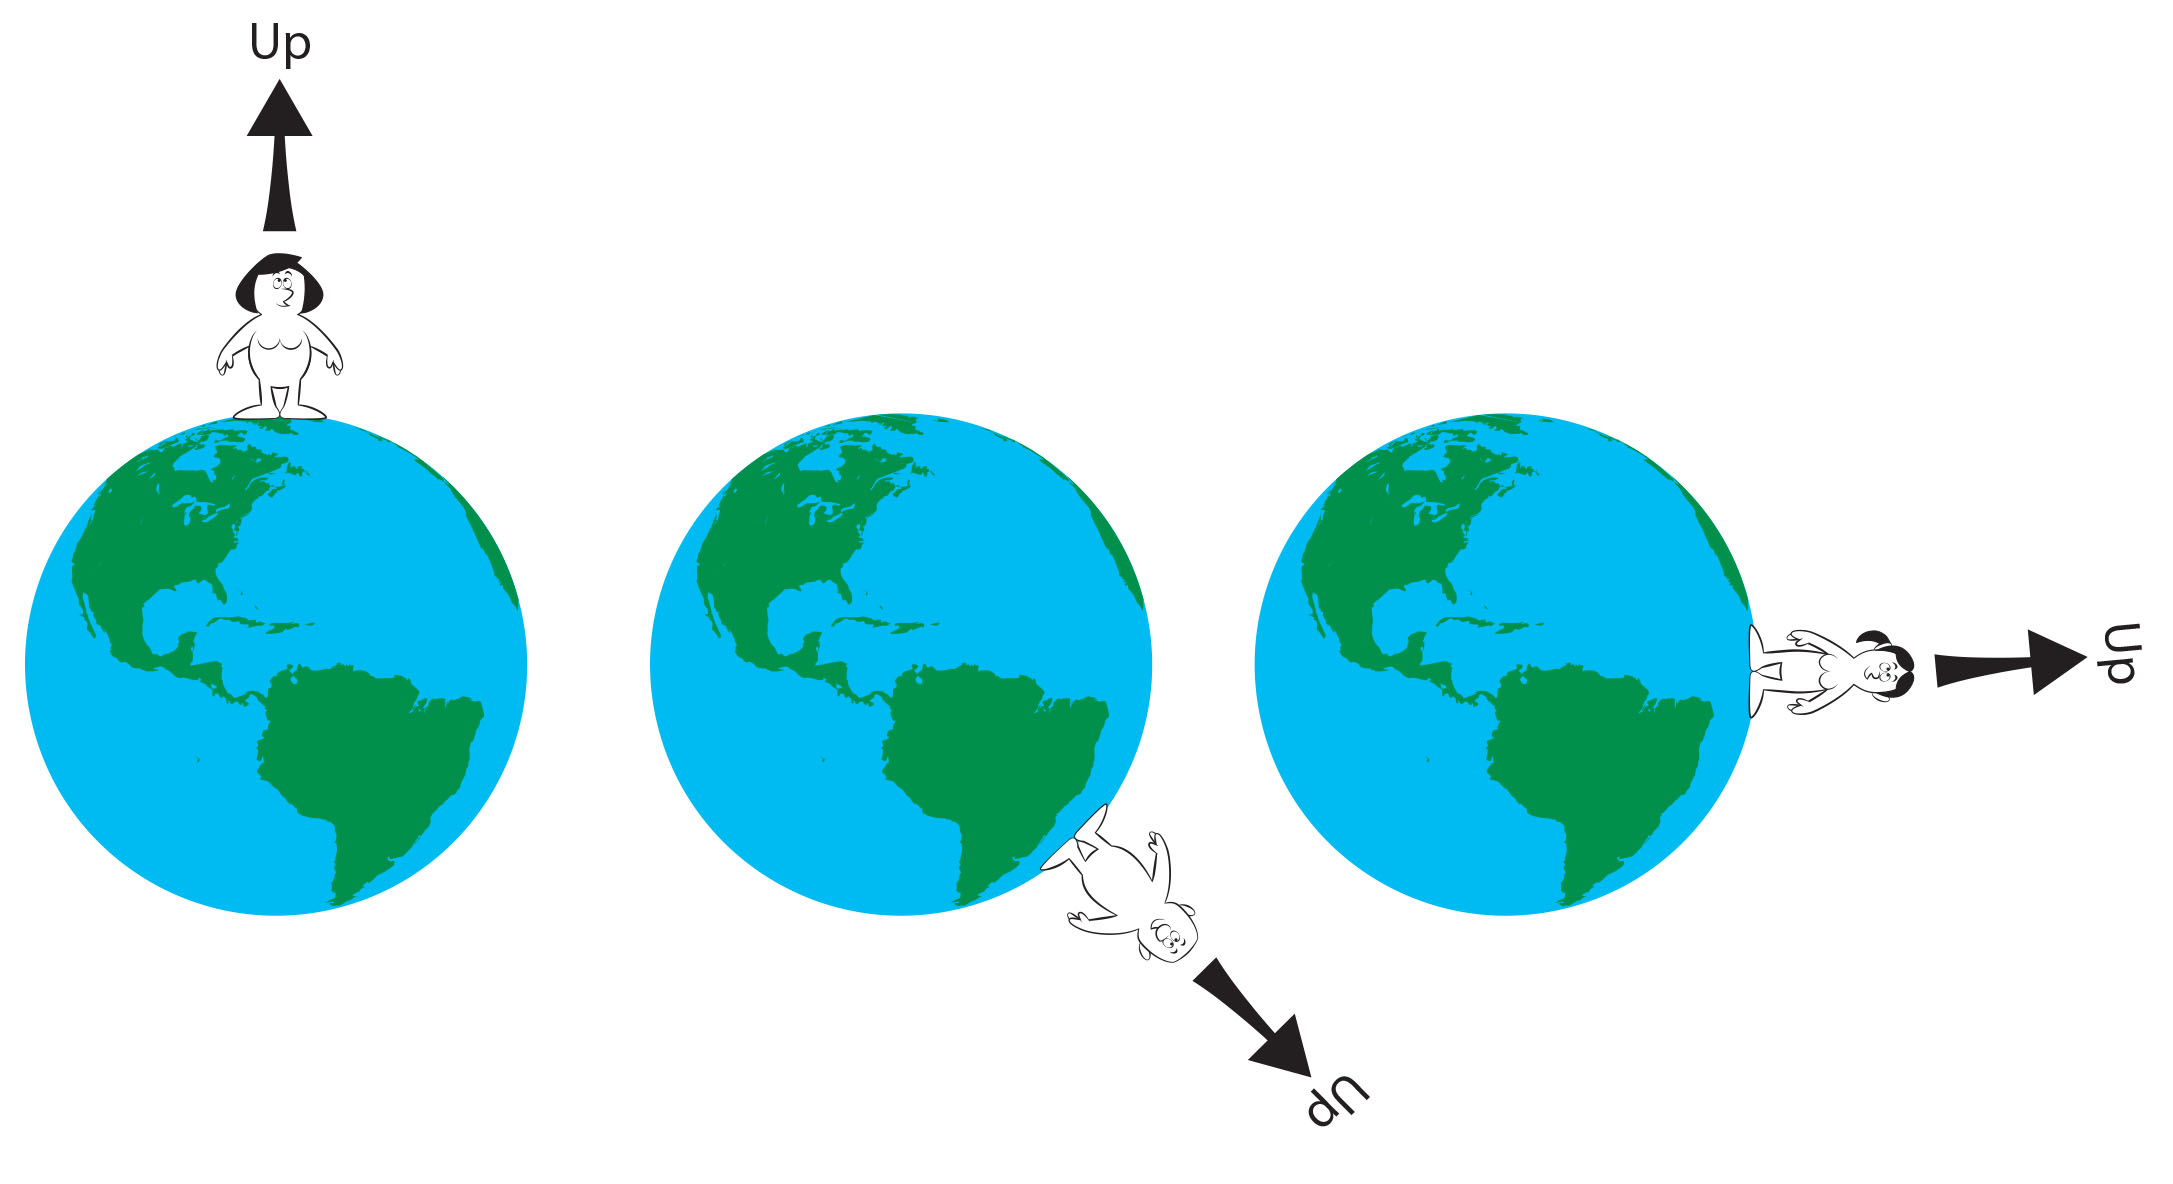 The direction we call “up” is opposite from the direction toward the center of the Earth.